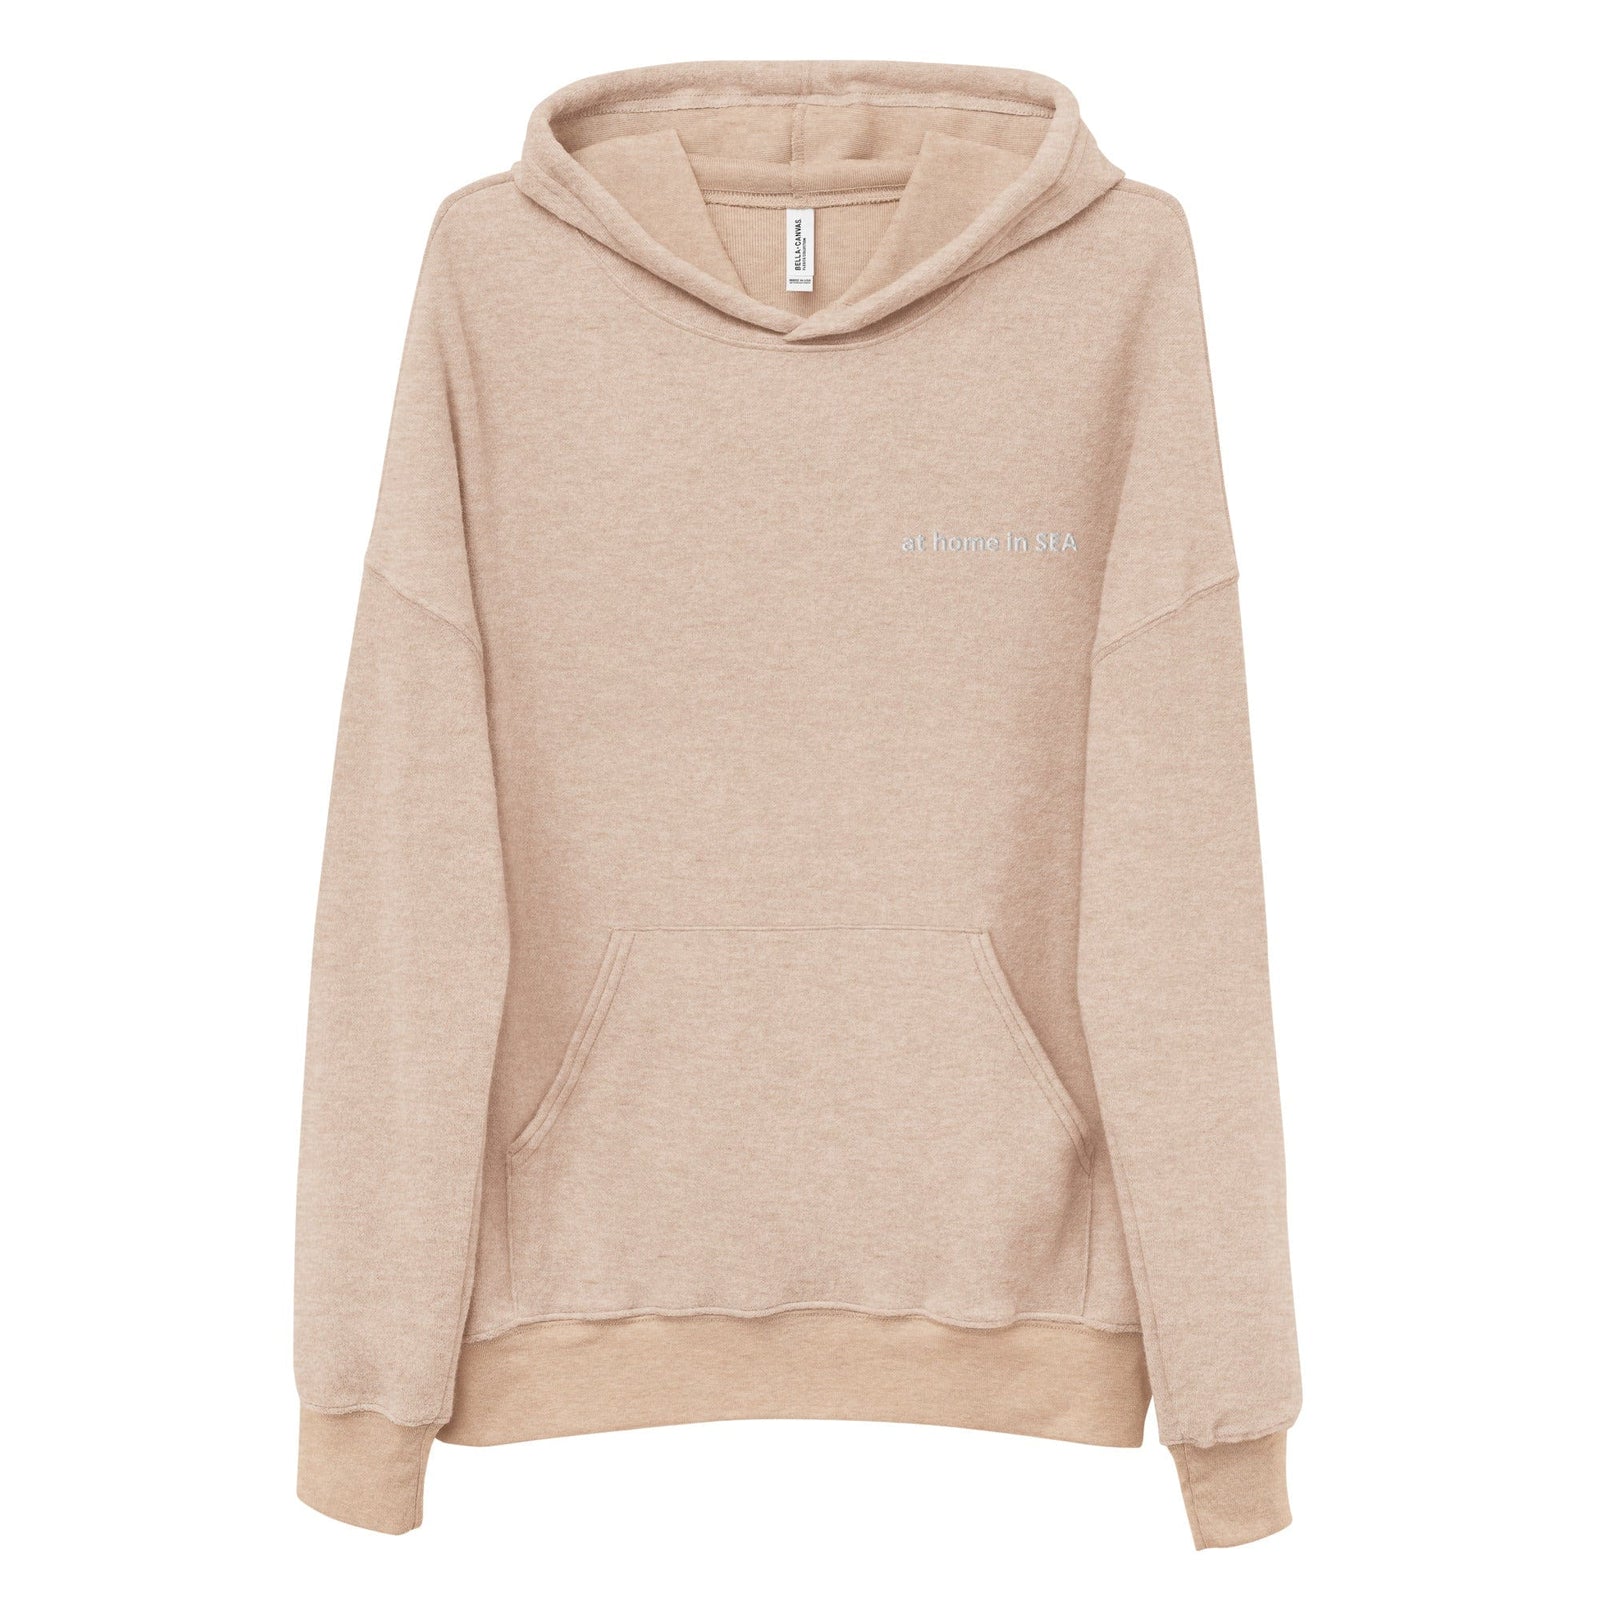 City Shirt Co at home in SEA™ sueded hoodie Heather Oat / S